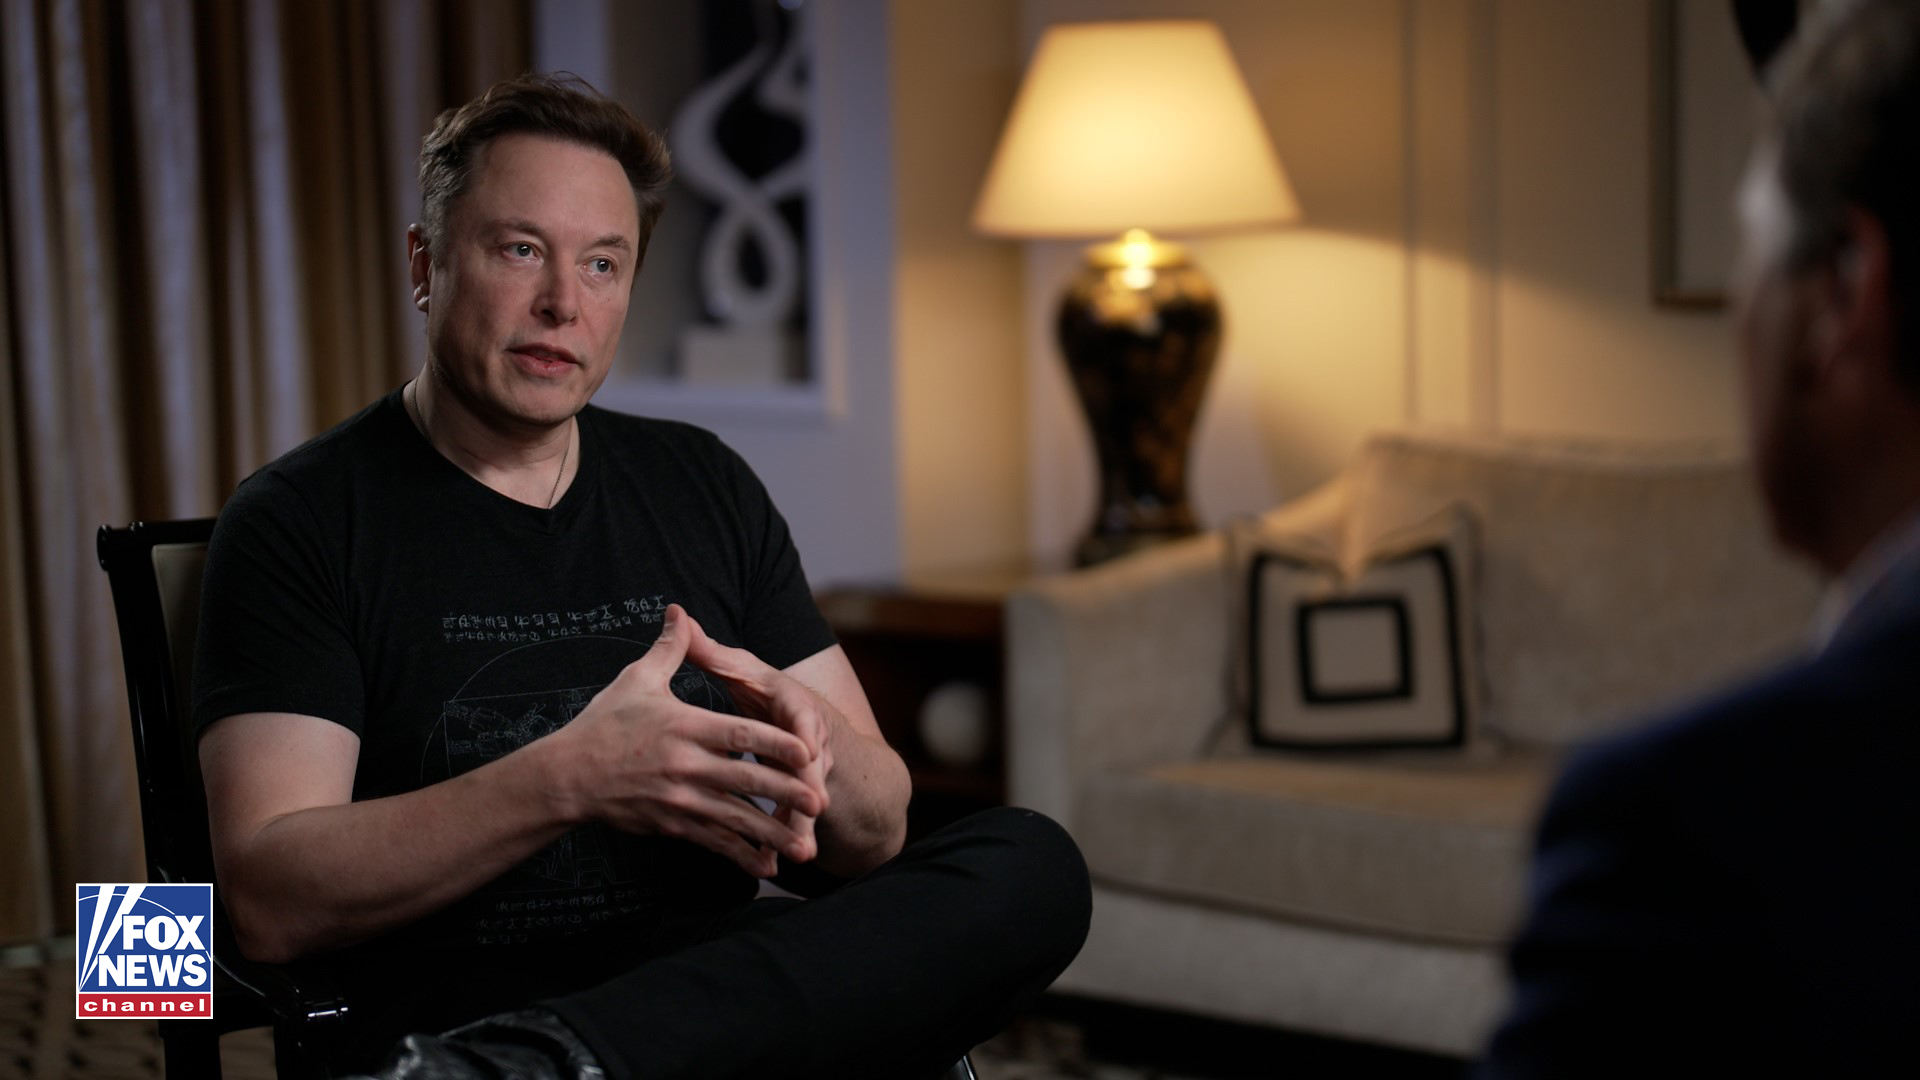 Elon Musk Warns Of Grave Danger That AI Could Pose To Humanity